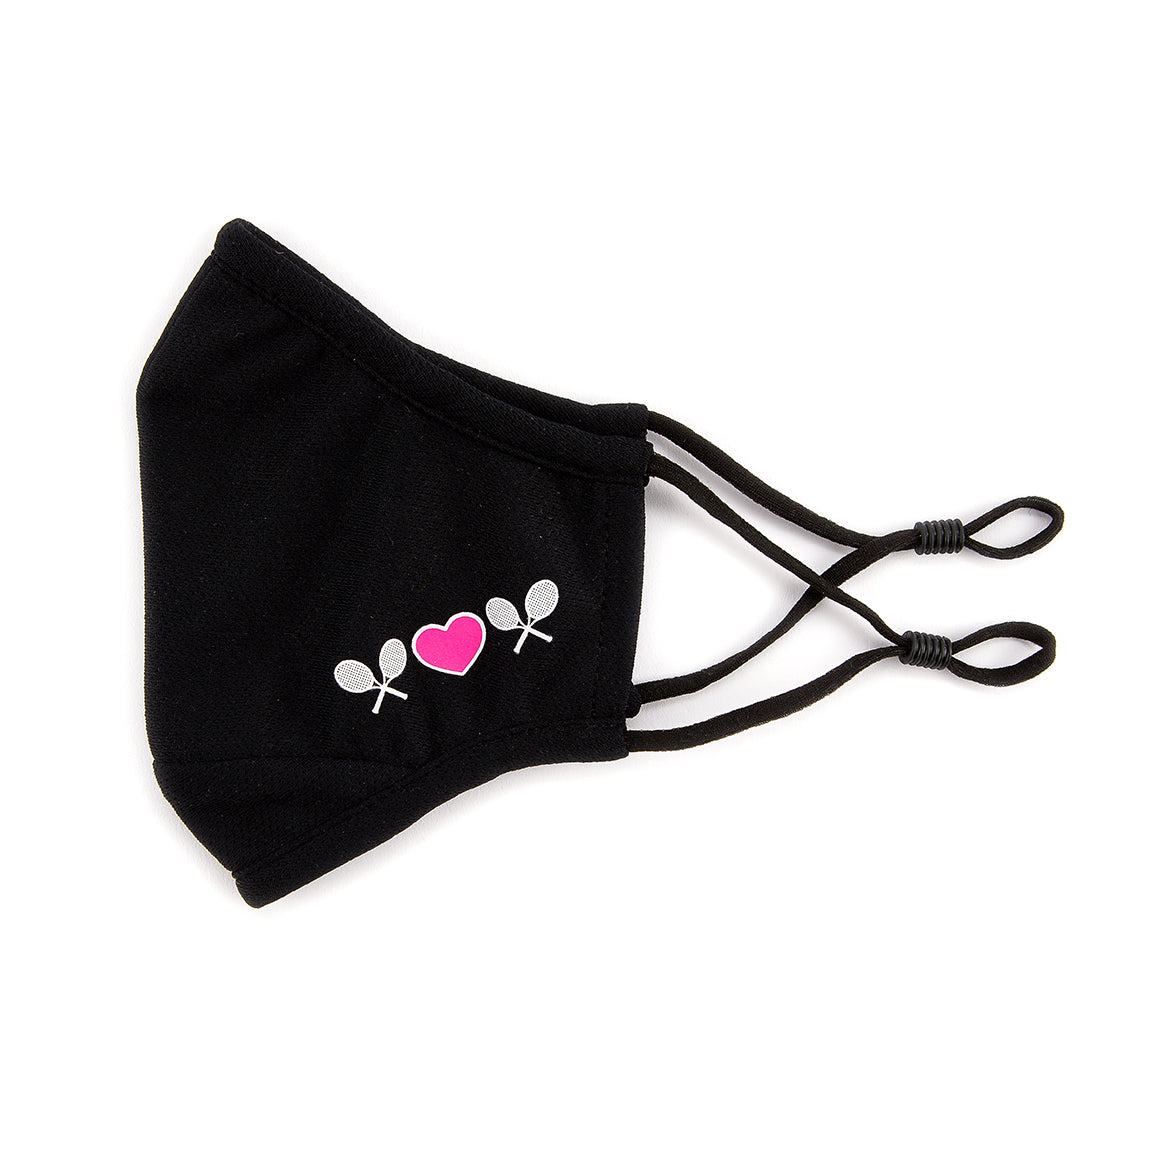 black face mask with white and pink tennis racquets and heart printed on side